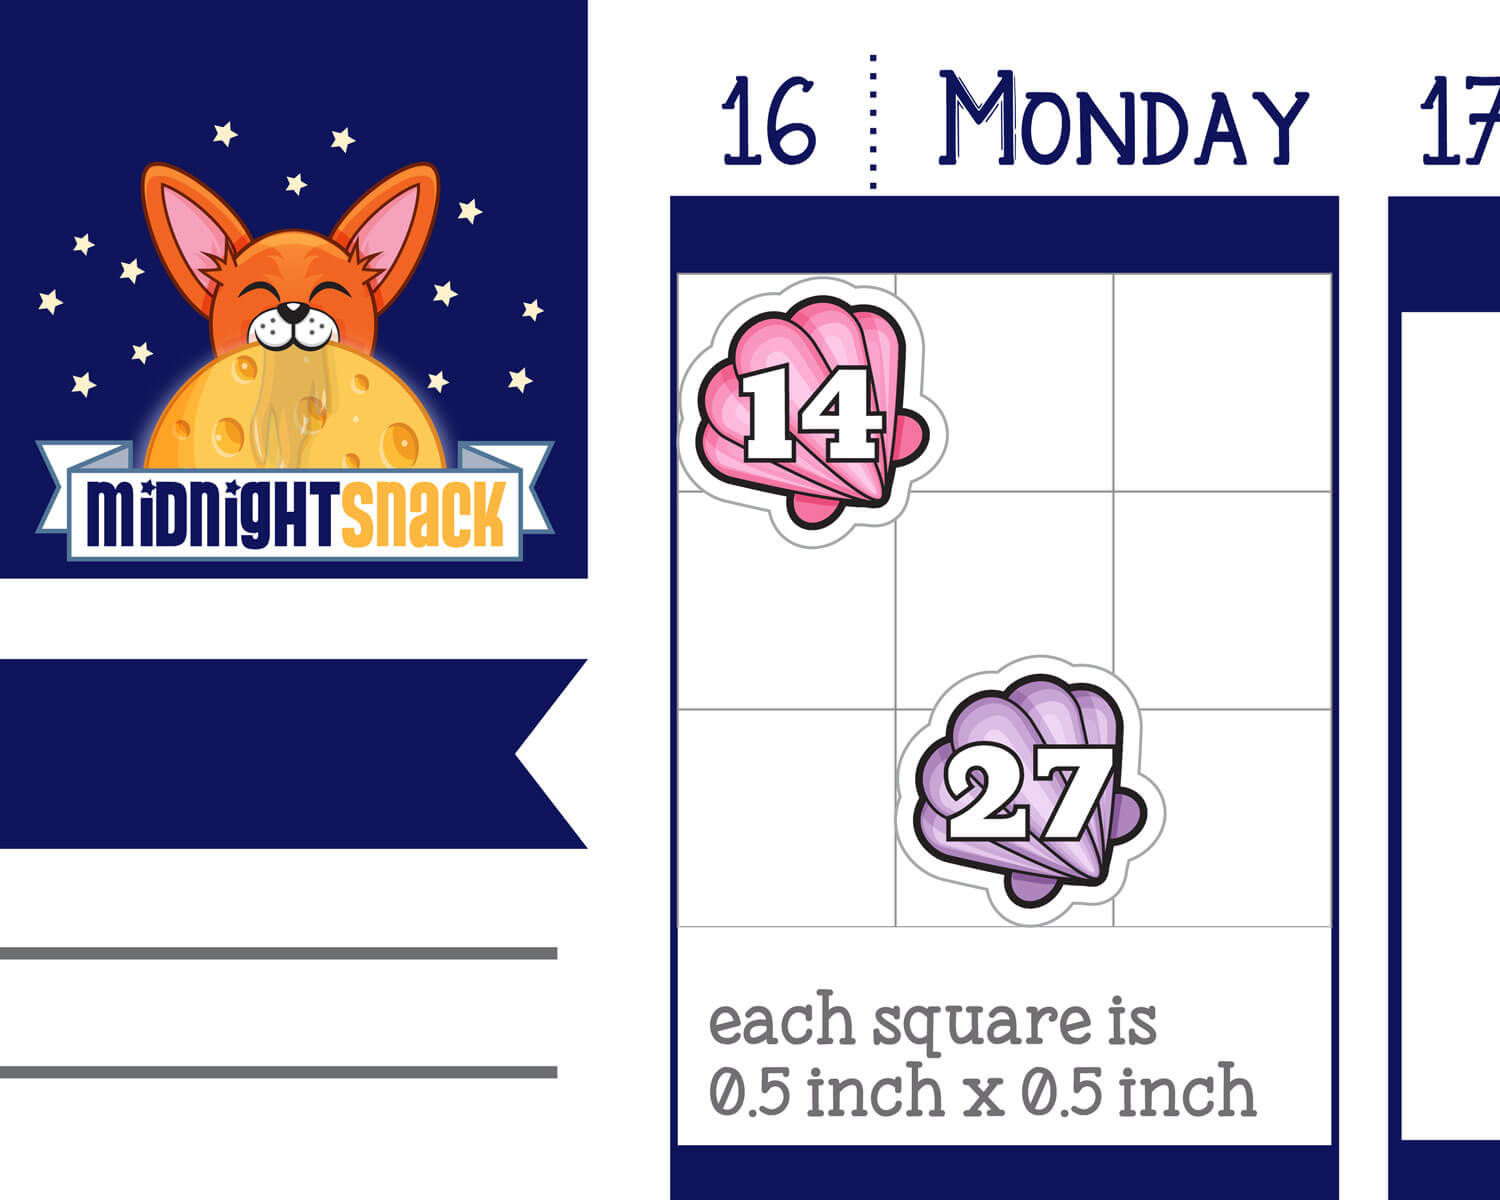 Sea Shells Date Cover Planner Stickers from Midnight Snack Planner